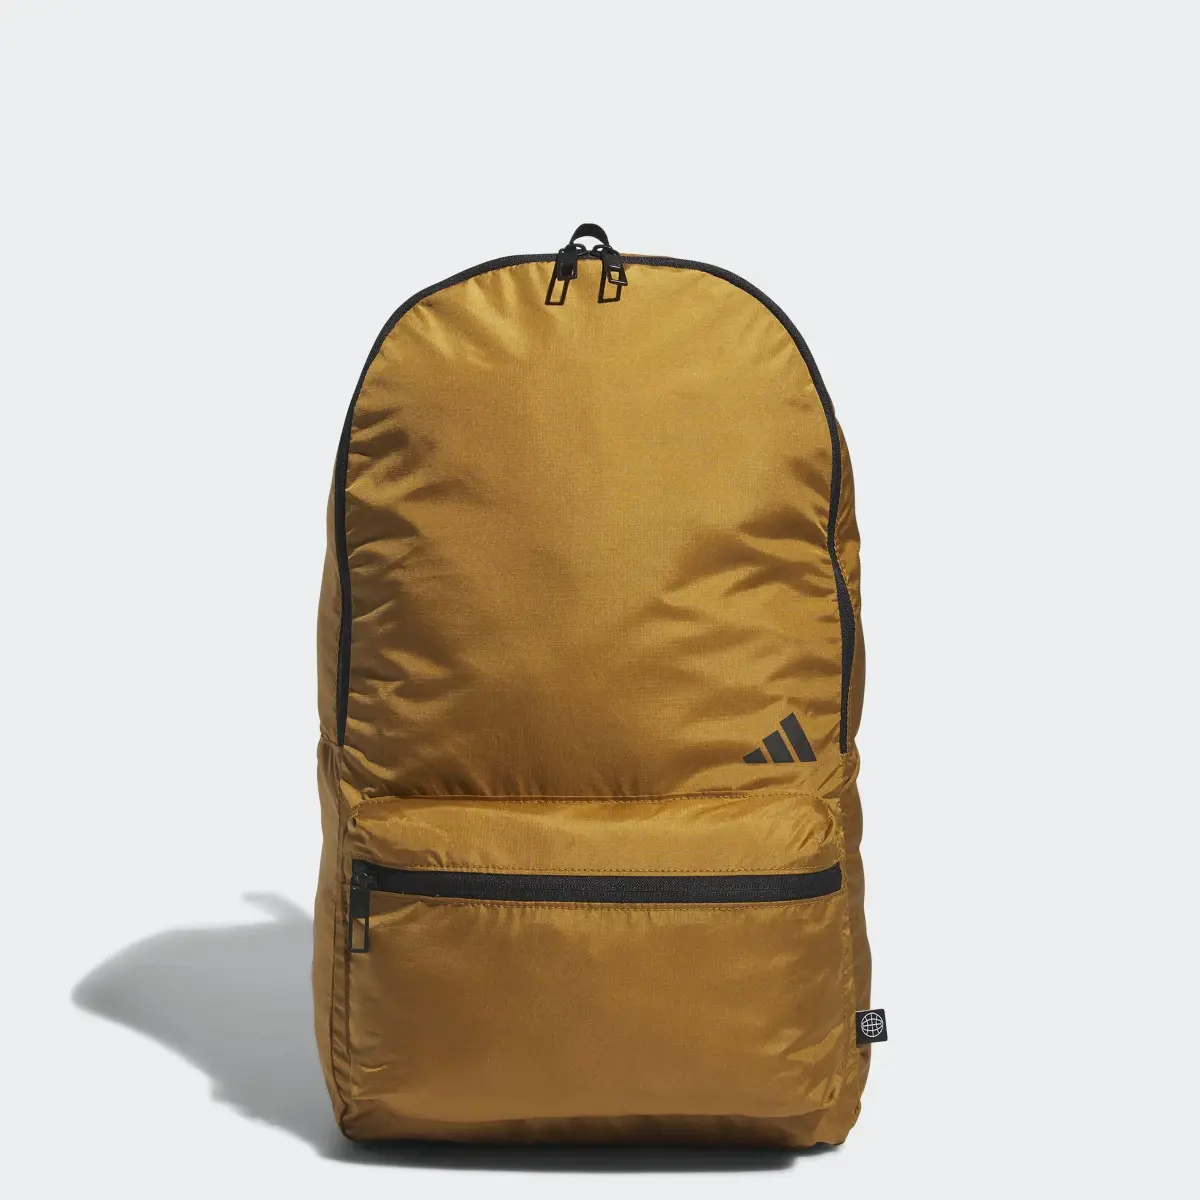 Adidas Golf Packable Backpack. 1